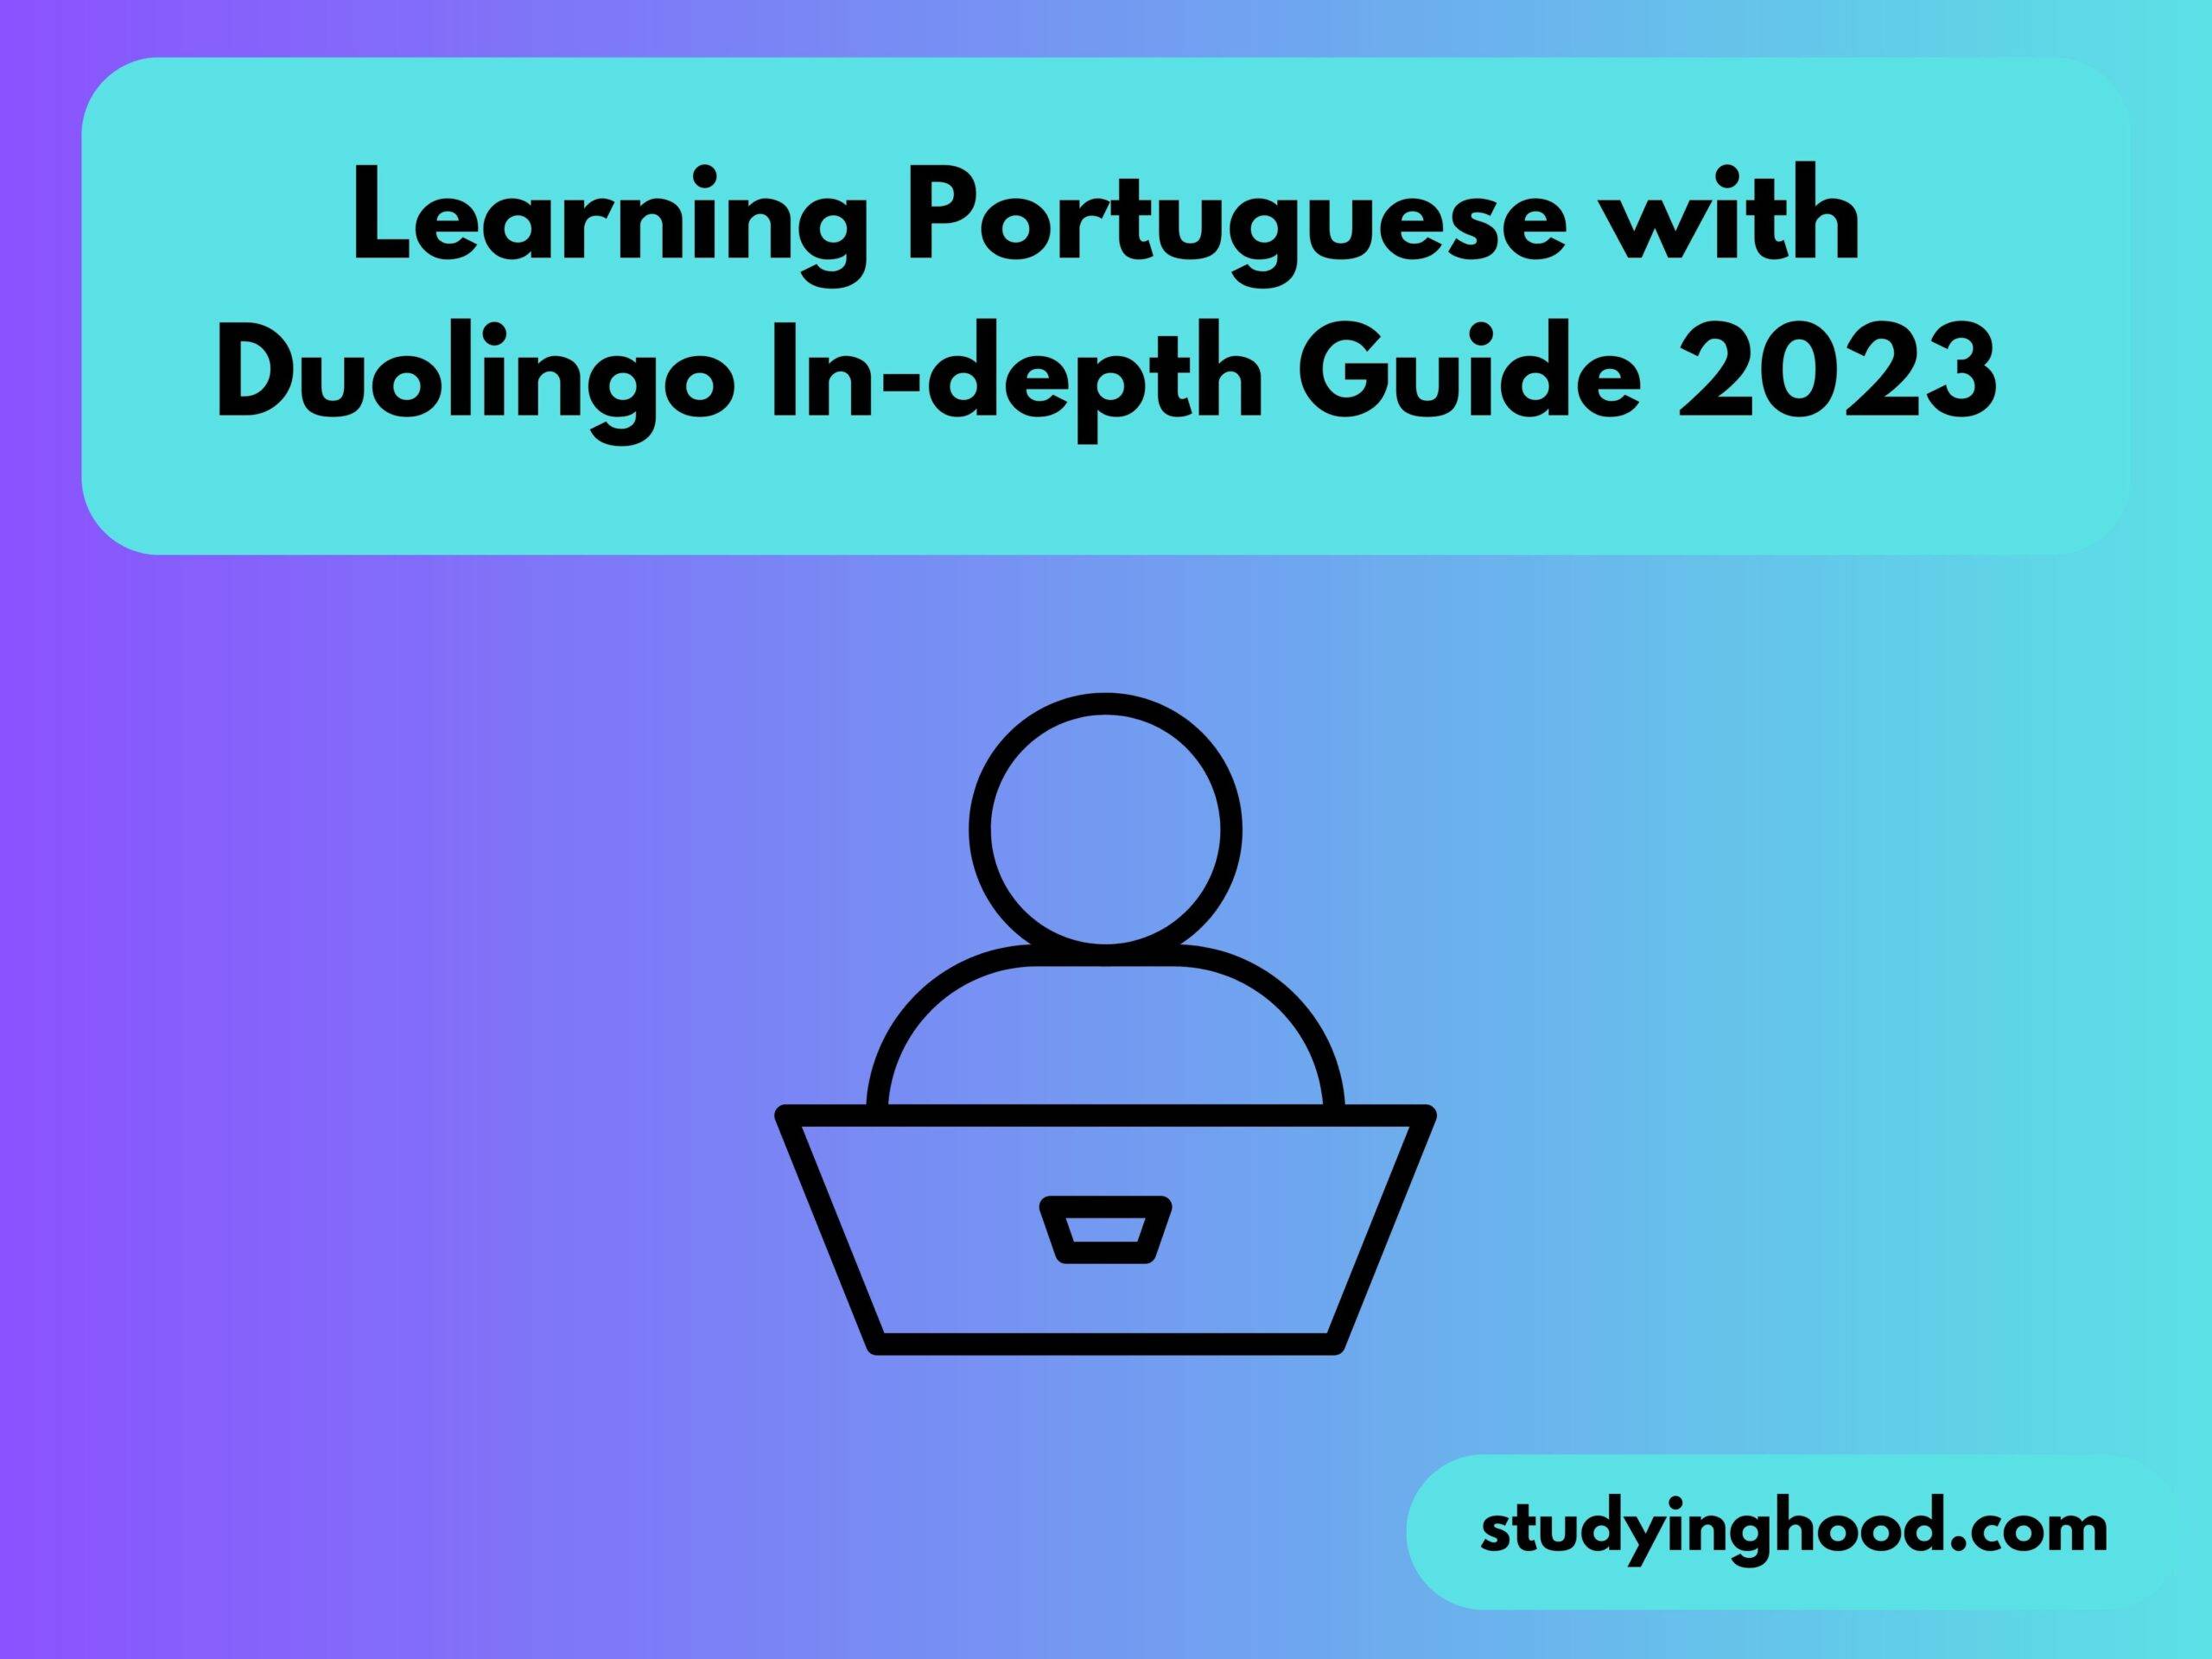 Learning Portuguese with Duolingo In-depth Guide 2023